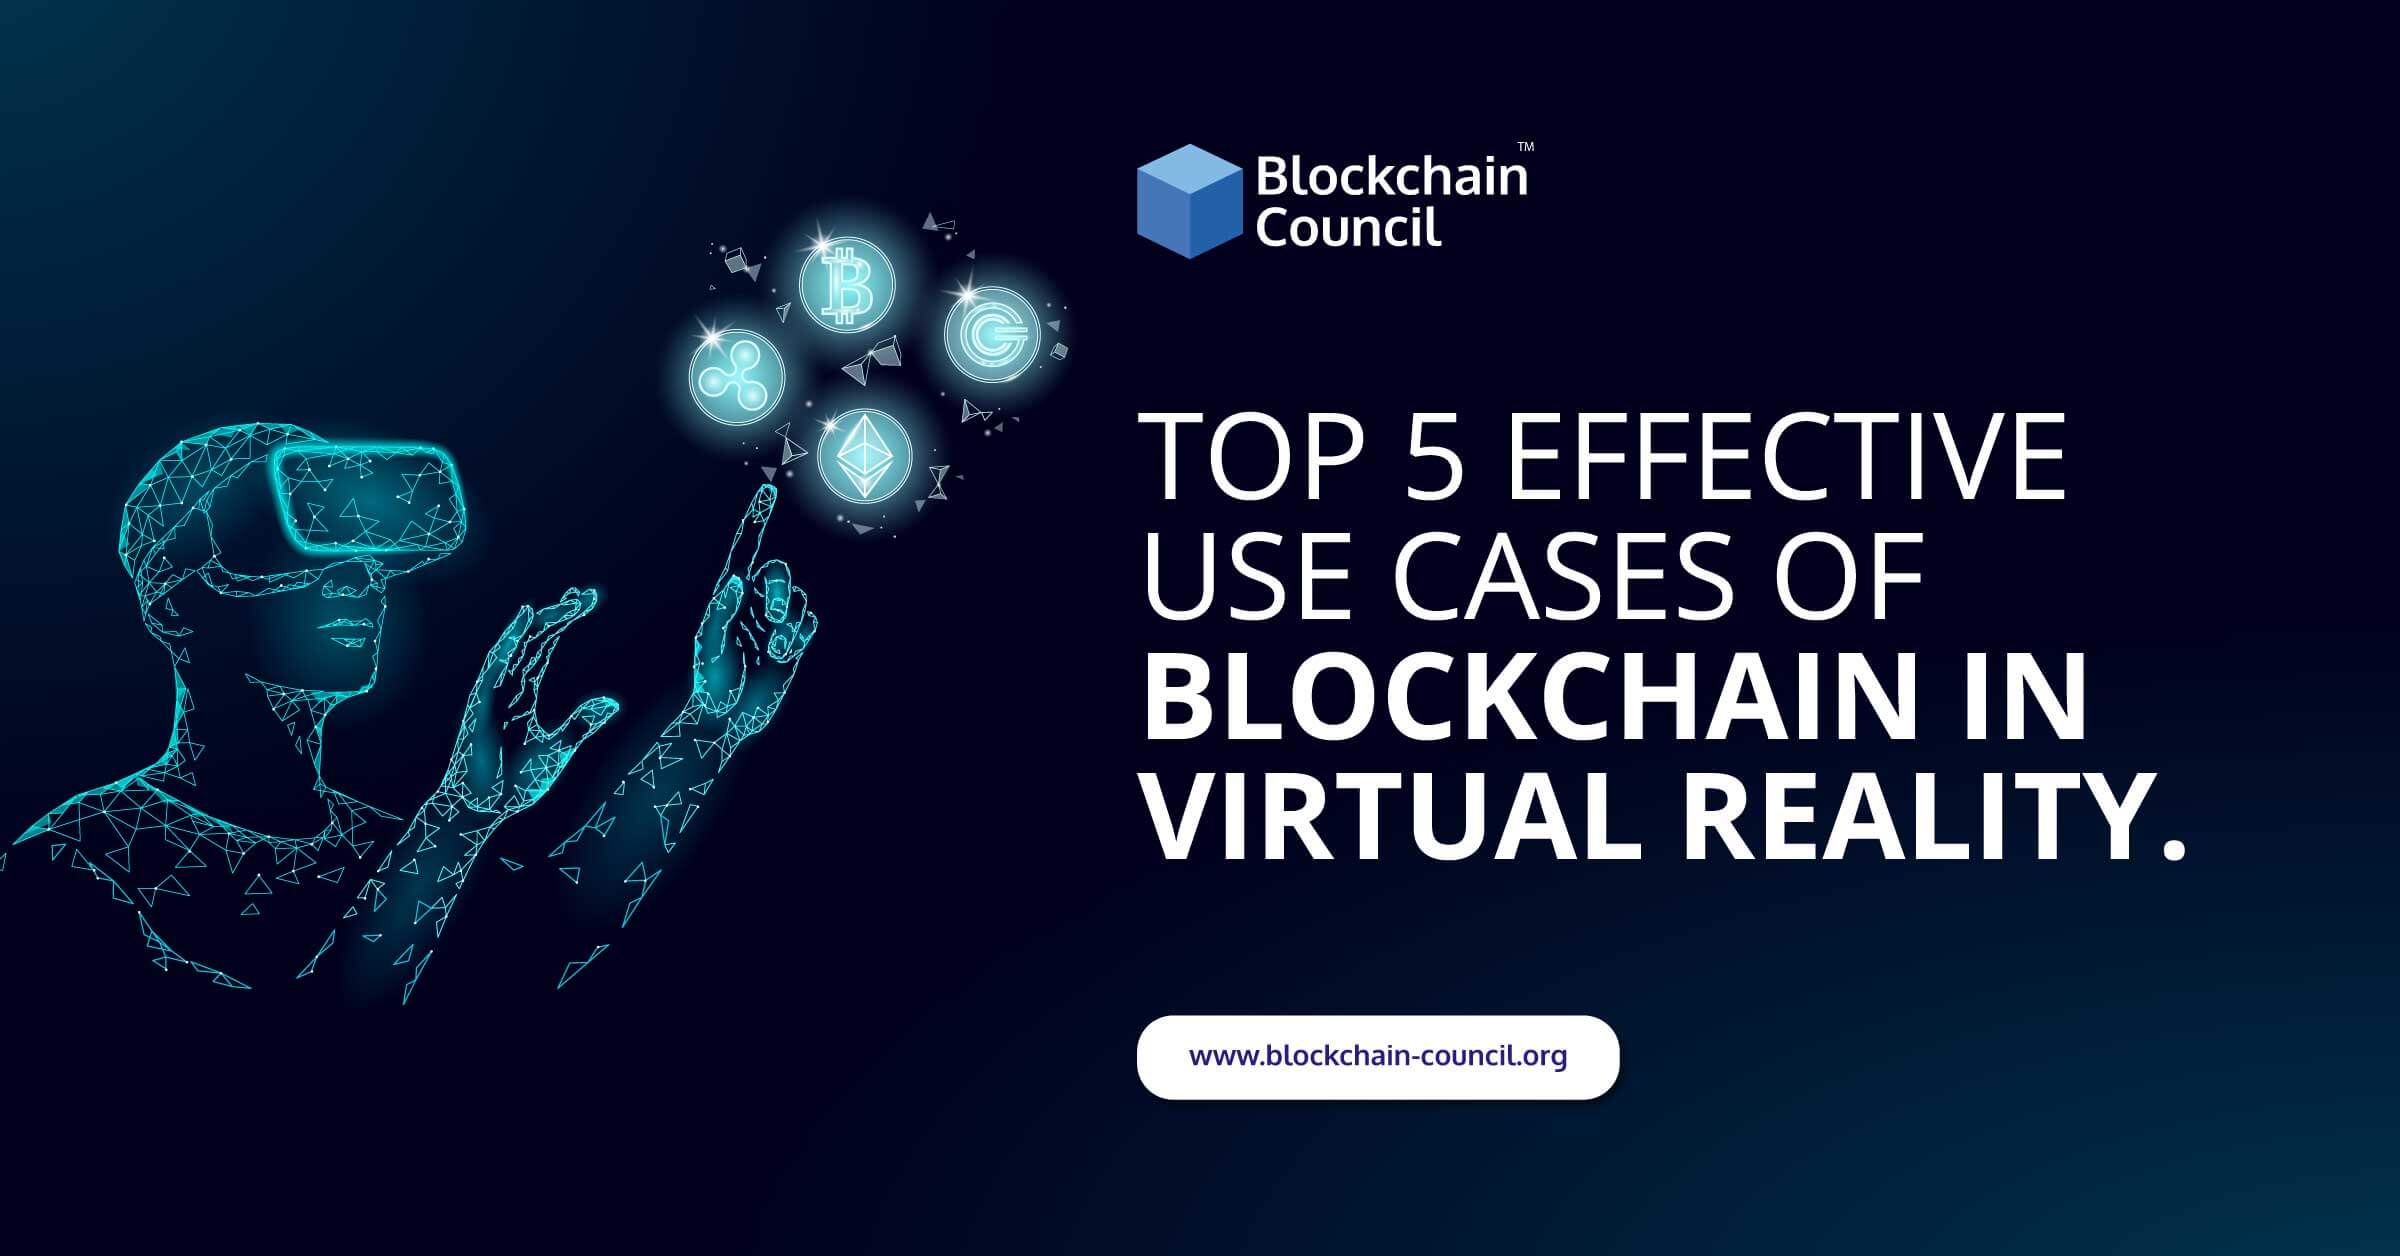 Top 5 Effective Use Cases Of Blockchain In Virtual Reality